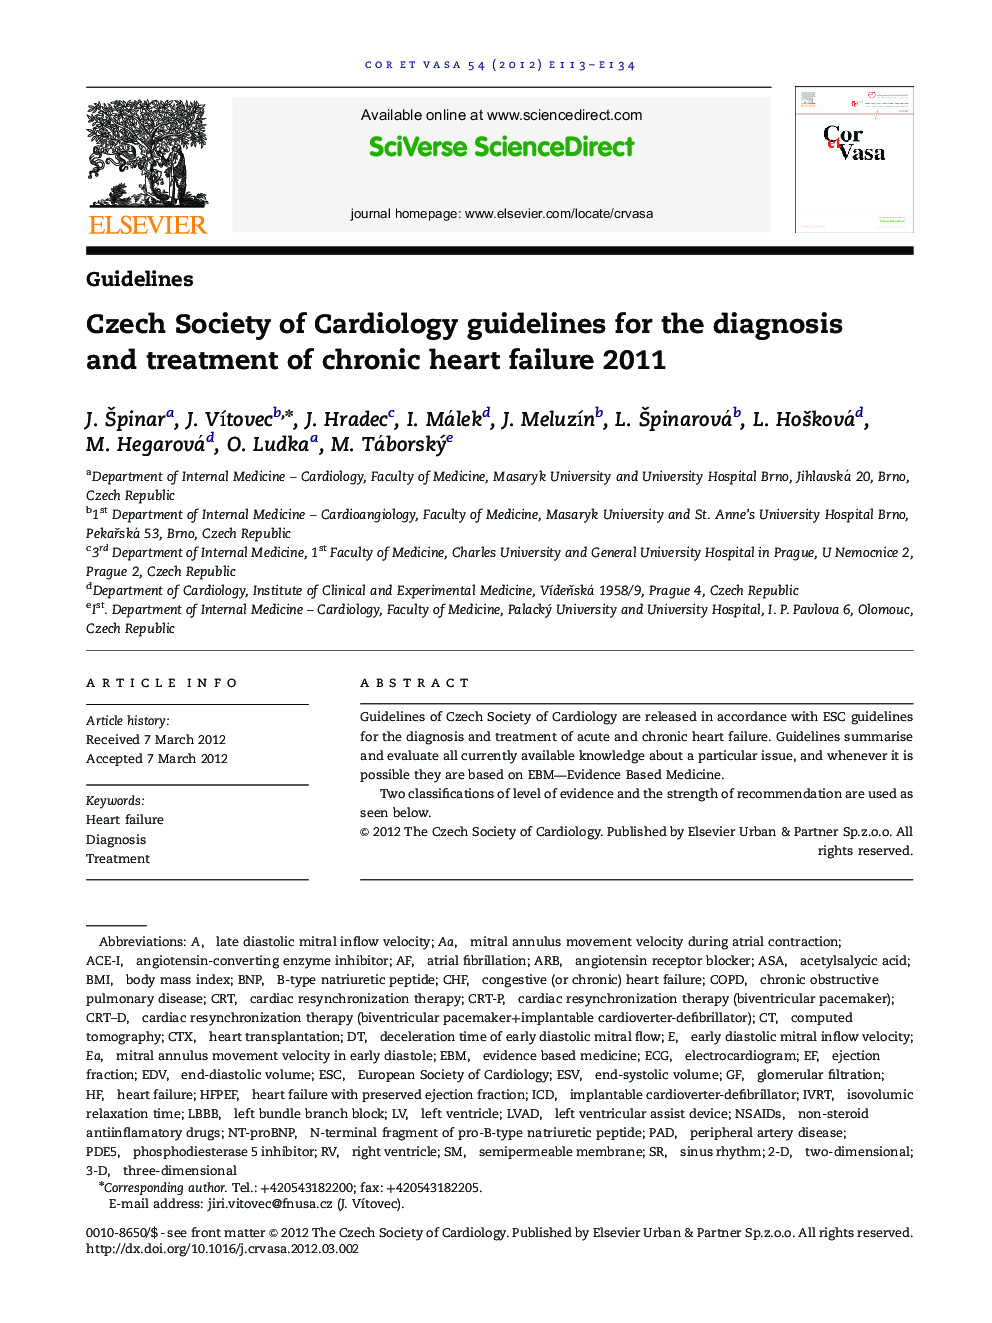 Czech Society of Cardiology guidelines for the diagnosis and treatment of chronic heart failure 2011